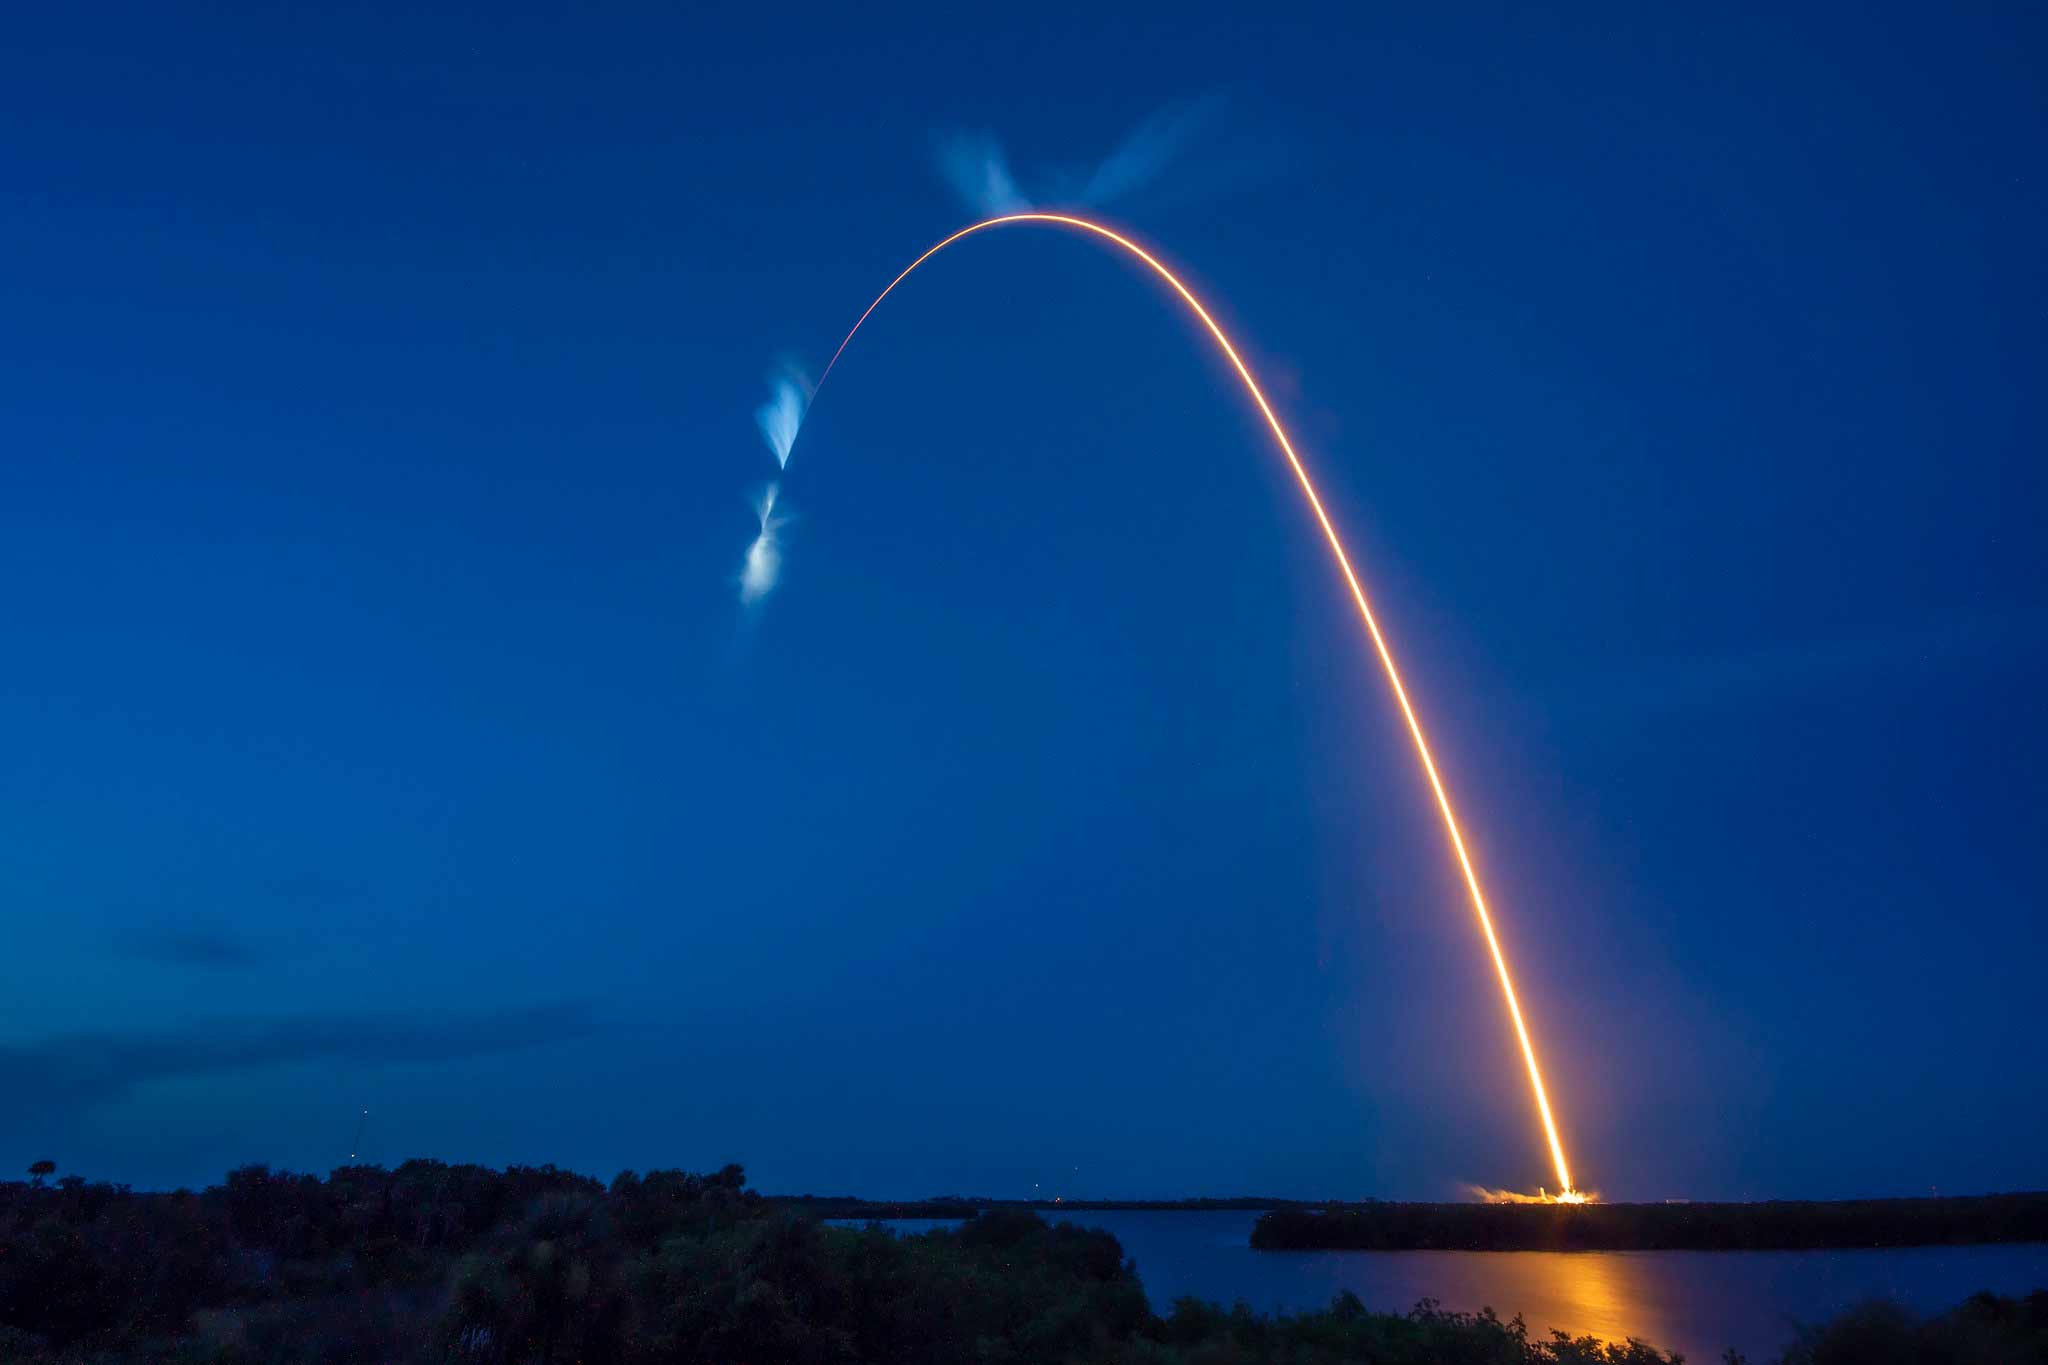 A bright trail of light is seen in this long-exposure photograph taken after the SpaceX Falcon 9 rocket, which carried the Dragon cargo spacecraft to the International Space Station, lifted off from Kennedy Space Center in Florida on July 14.